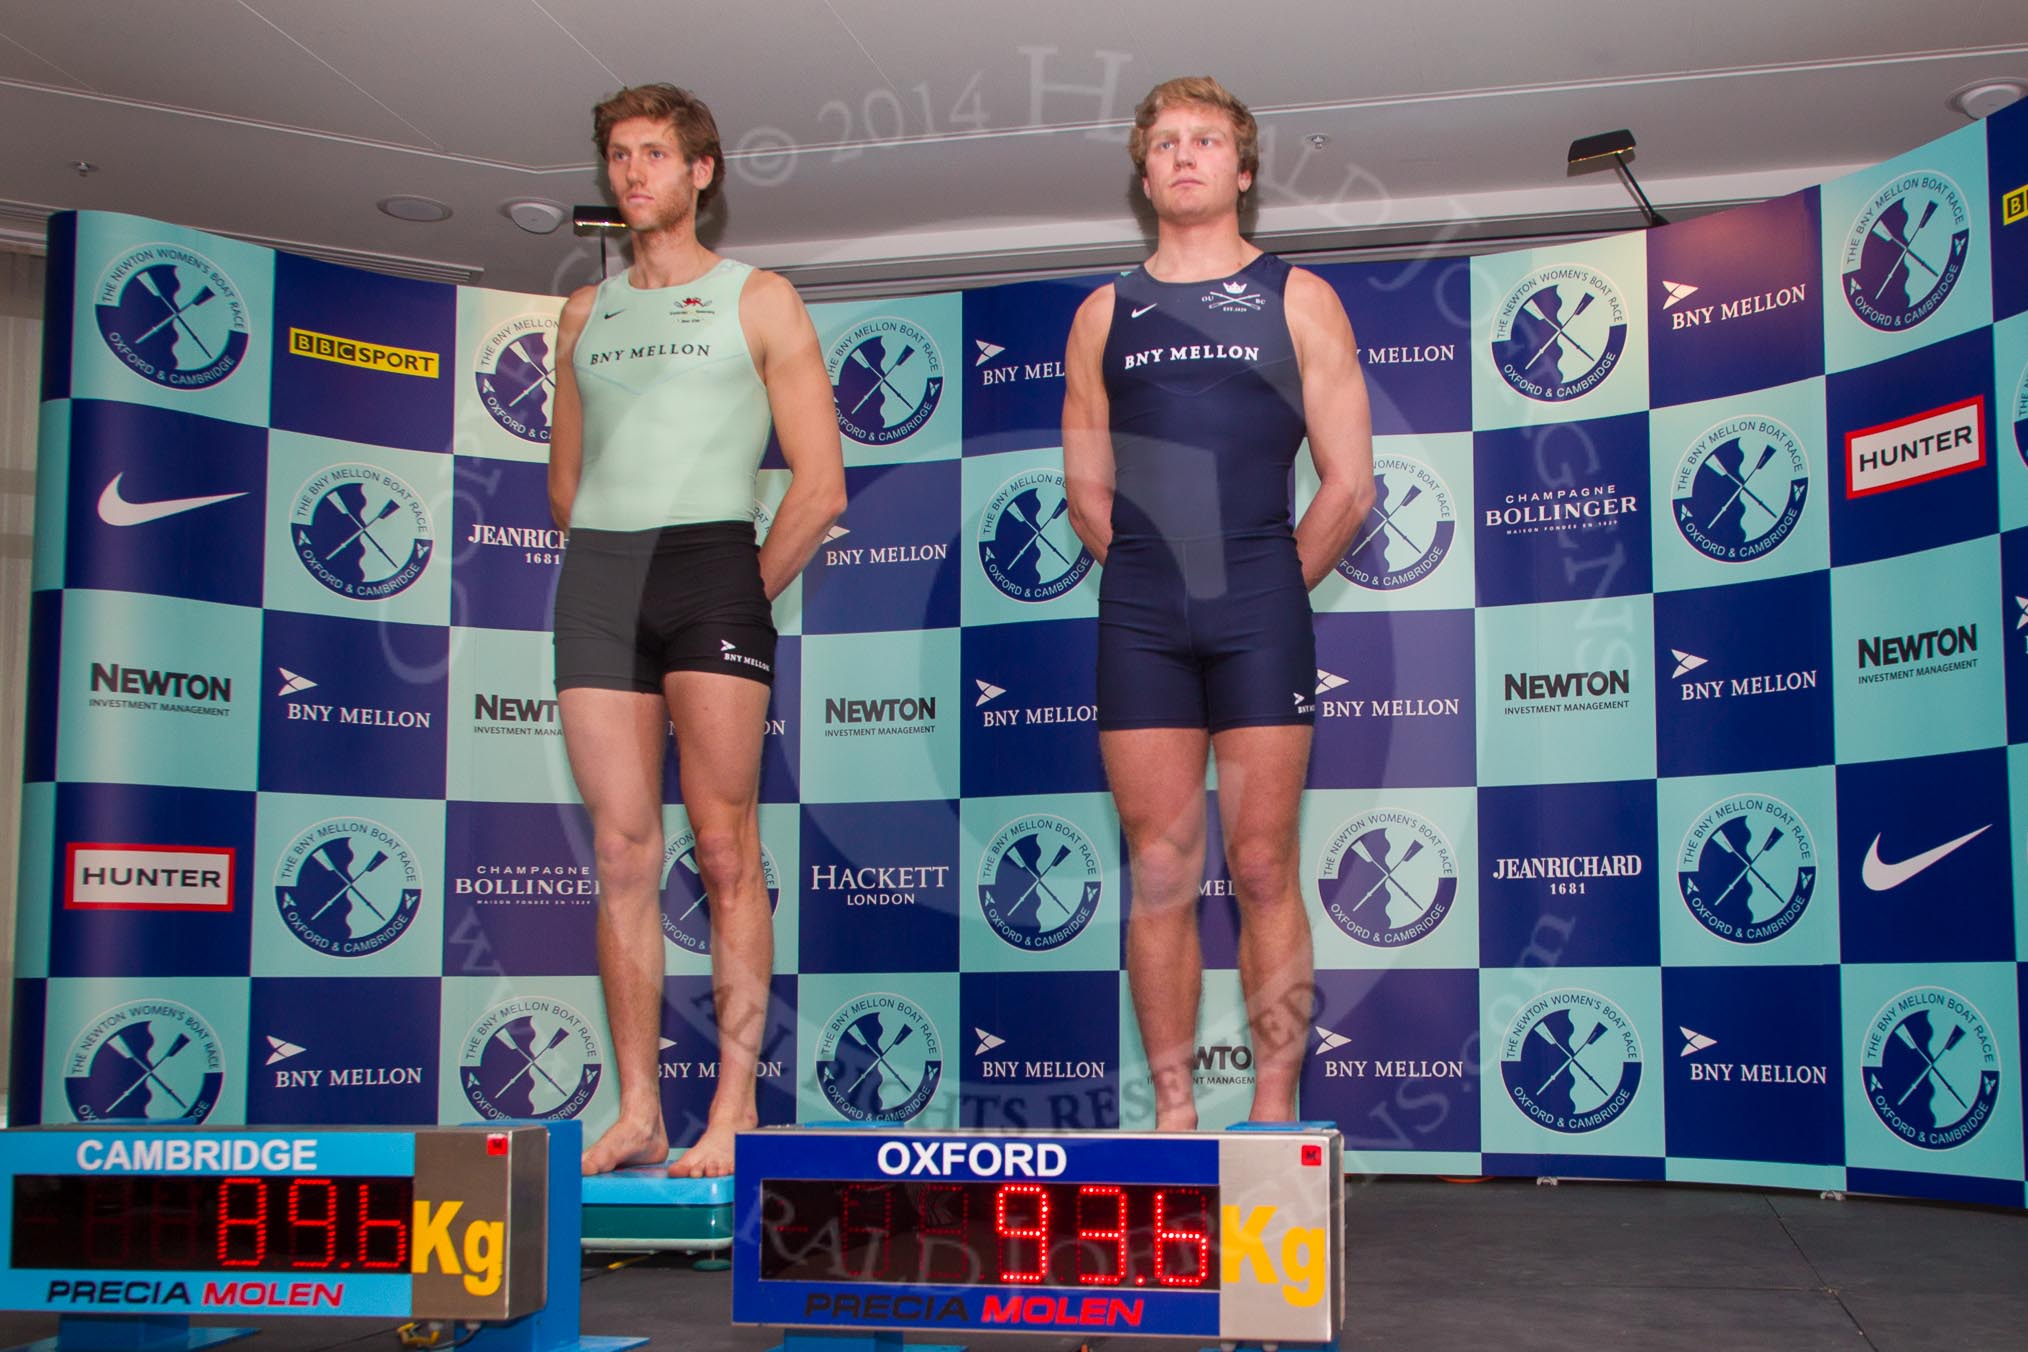 The Boat Race season 2014 - Crew Announcement and Weigh In: The 2014 Boat Race crews, Cambridge stroke Henry Hoffstot  and Oxford stroke Constantine Louloudis..
BNY Mellon Centre,
London EC4V 4LA,
London,
United Kingdom,
on 10 March 2014 at 12:05, image #110